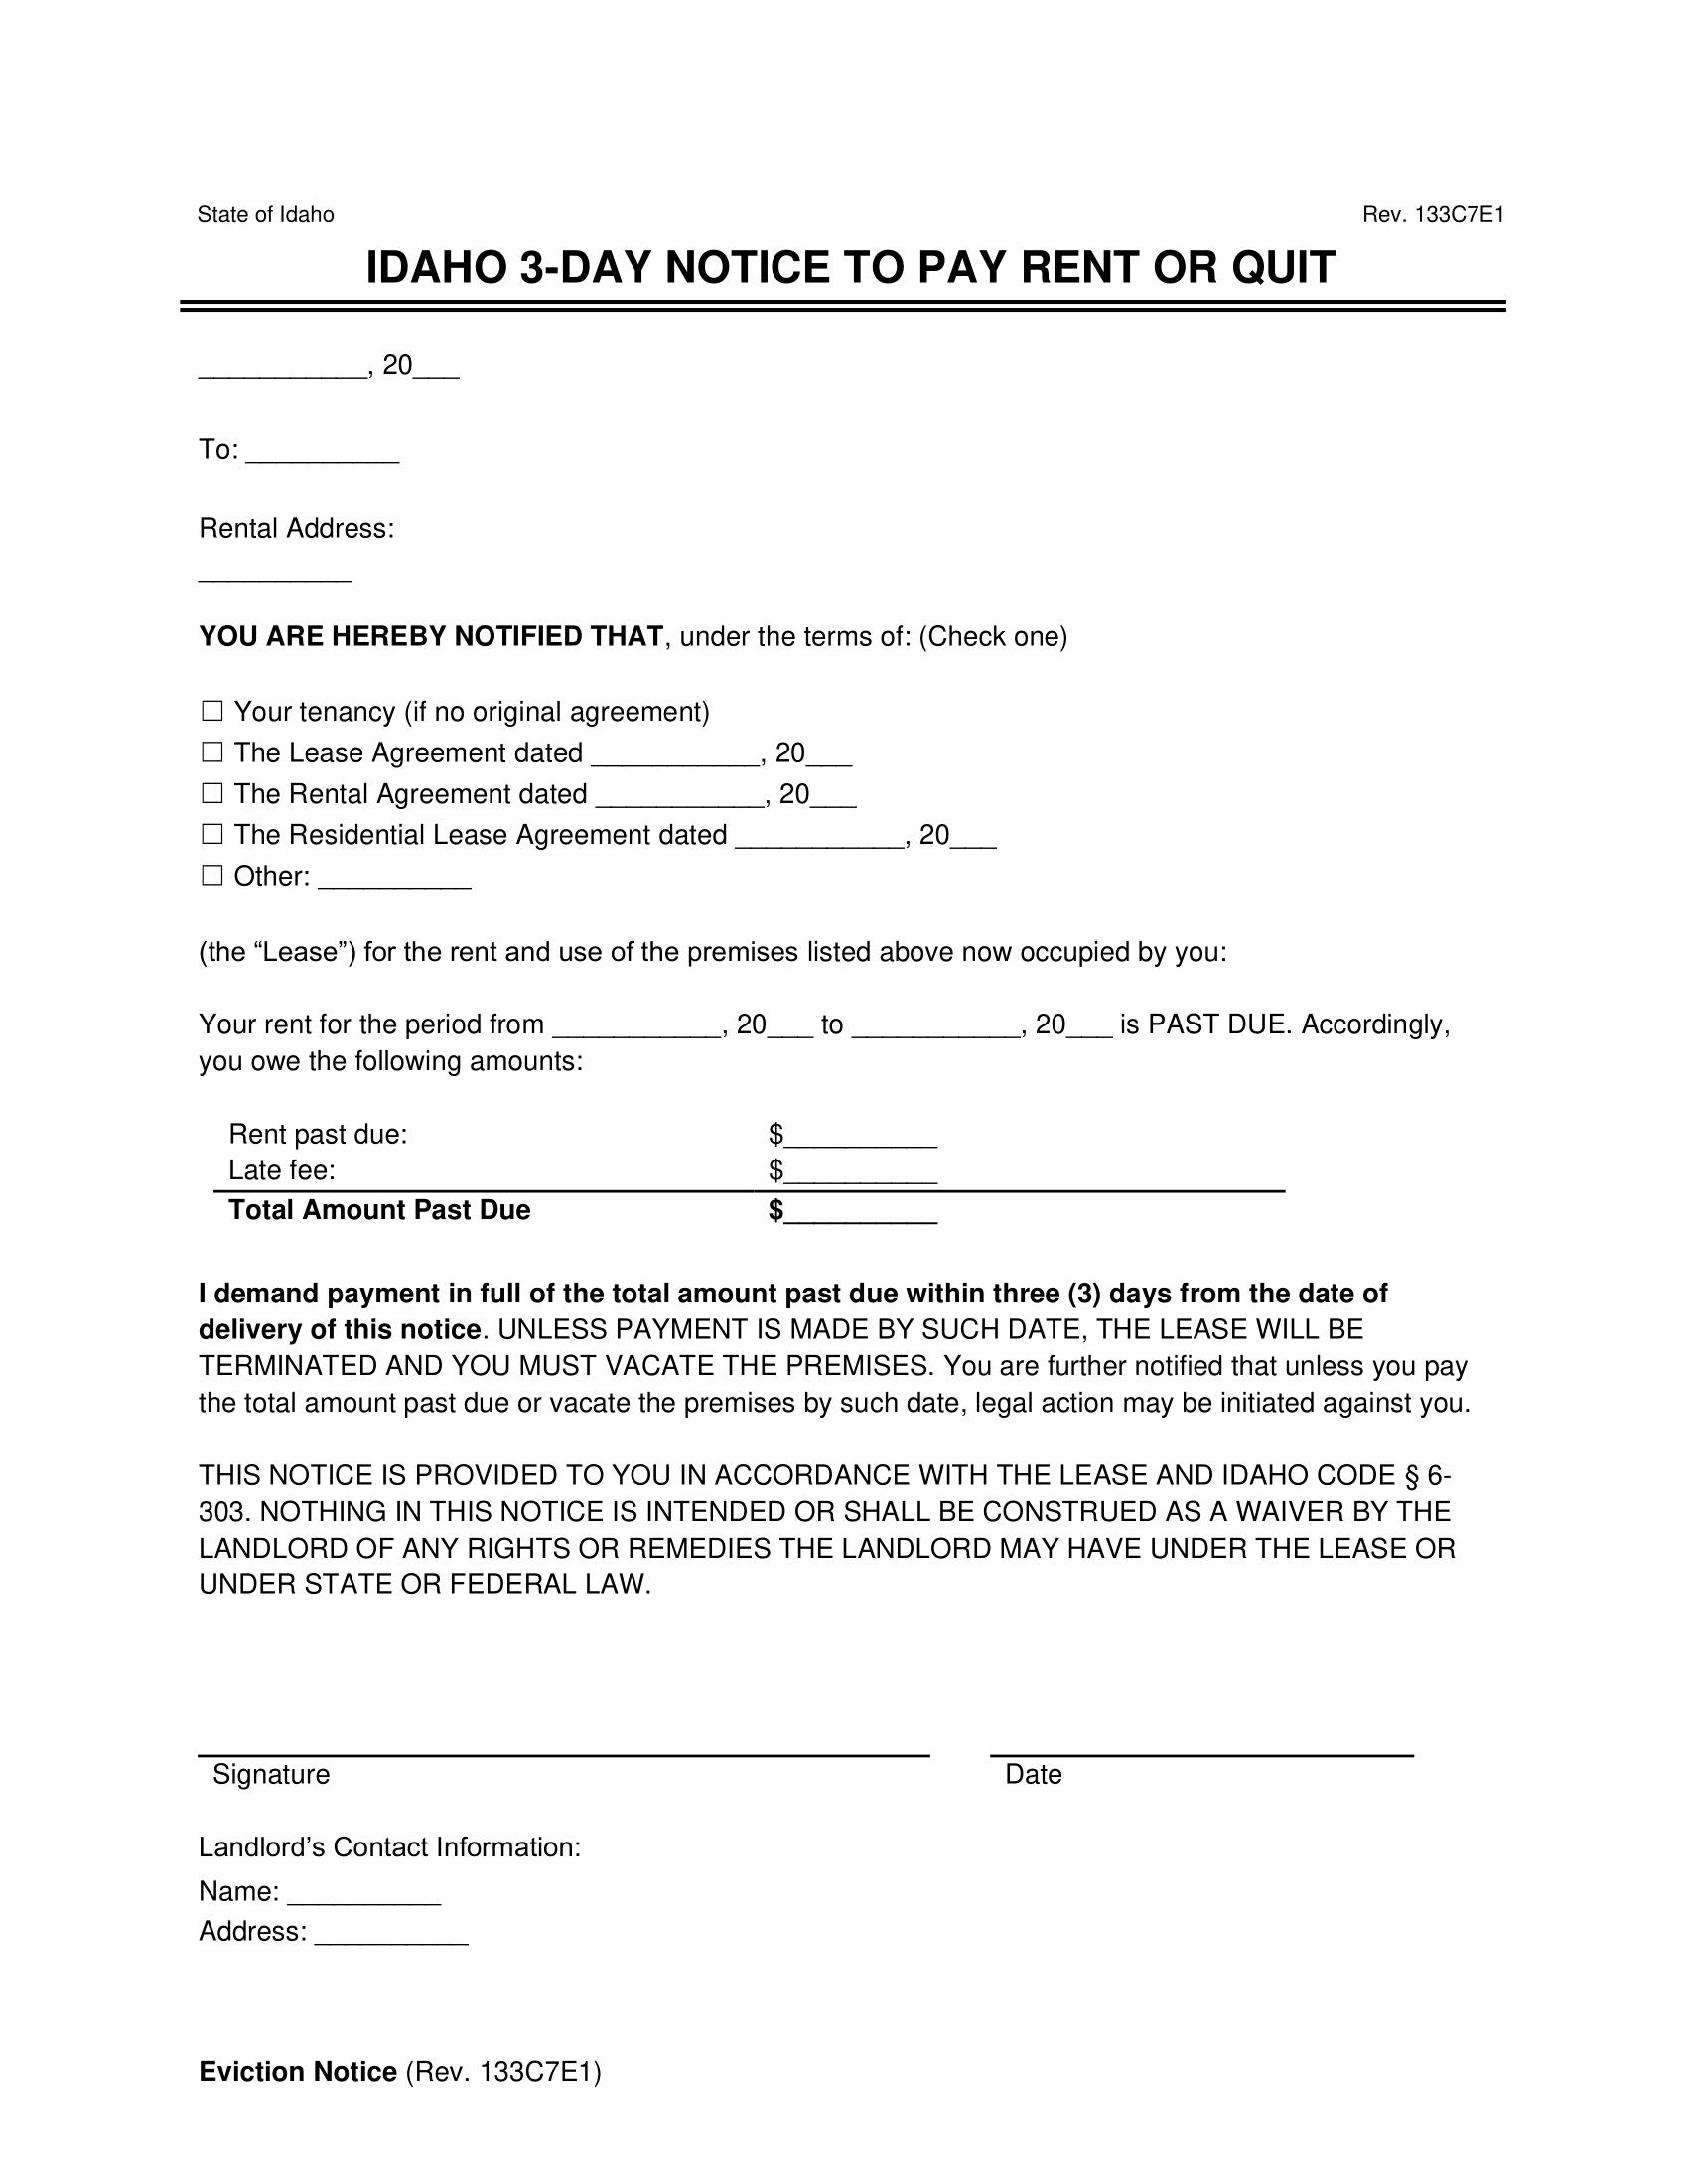 Idaho 3-Day Notice to Quit for Non-Payment of Rent